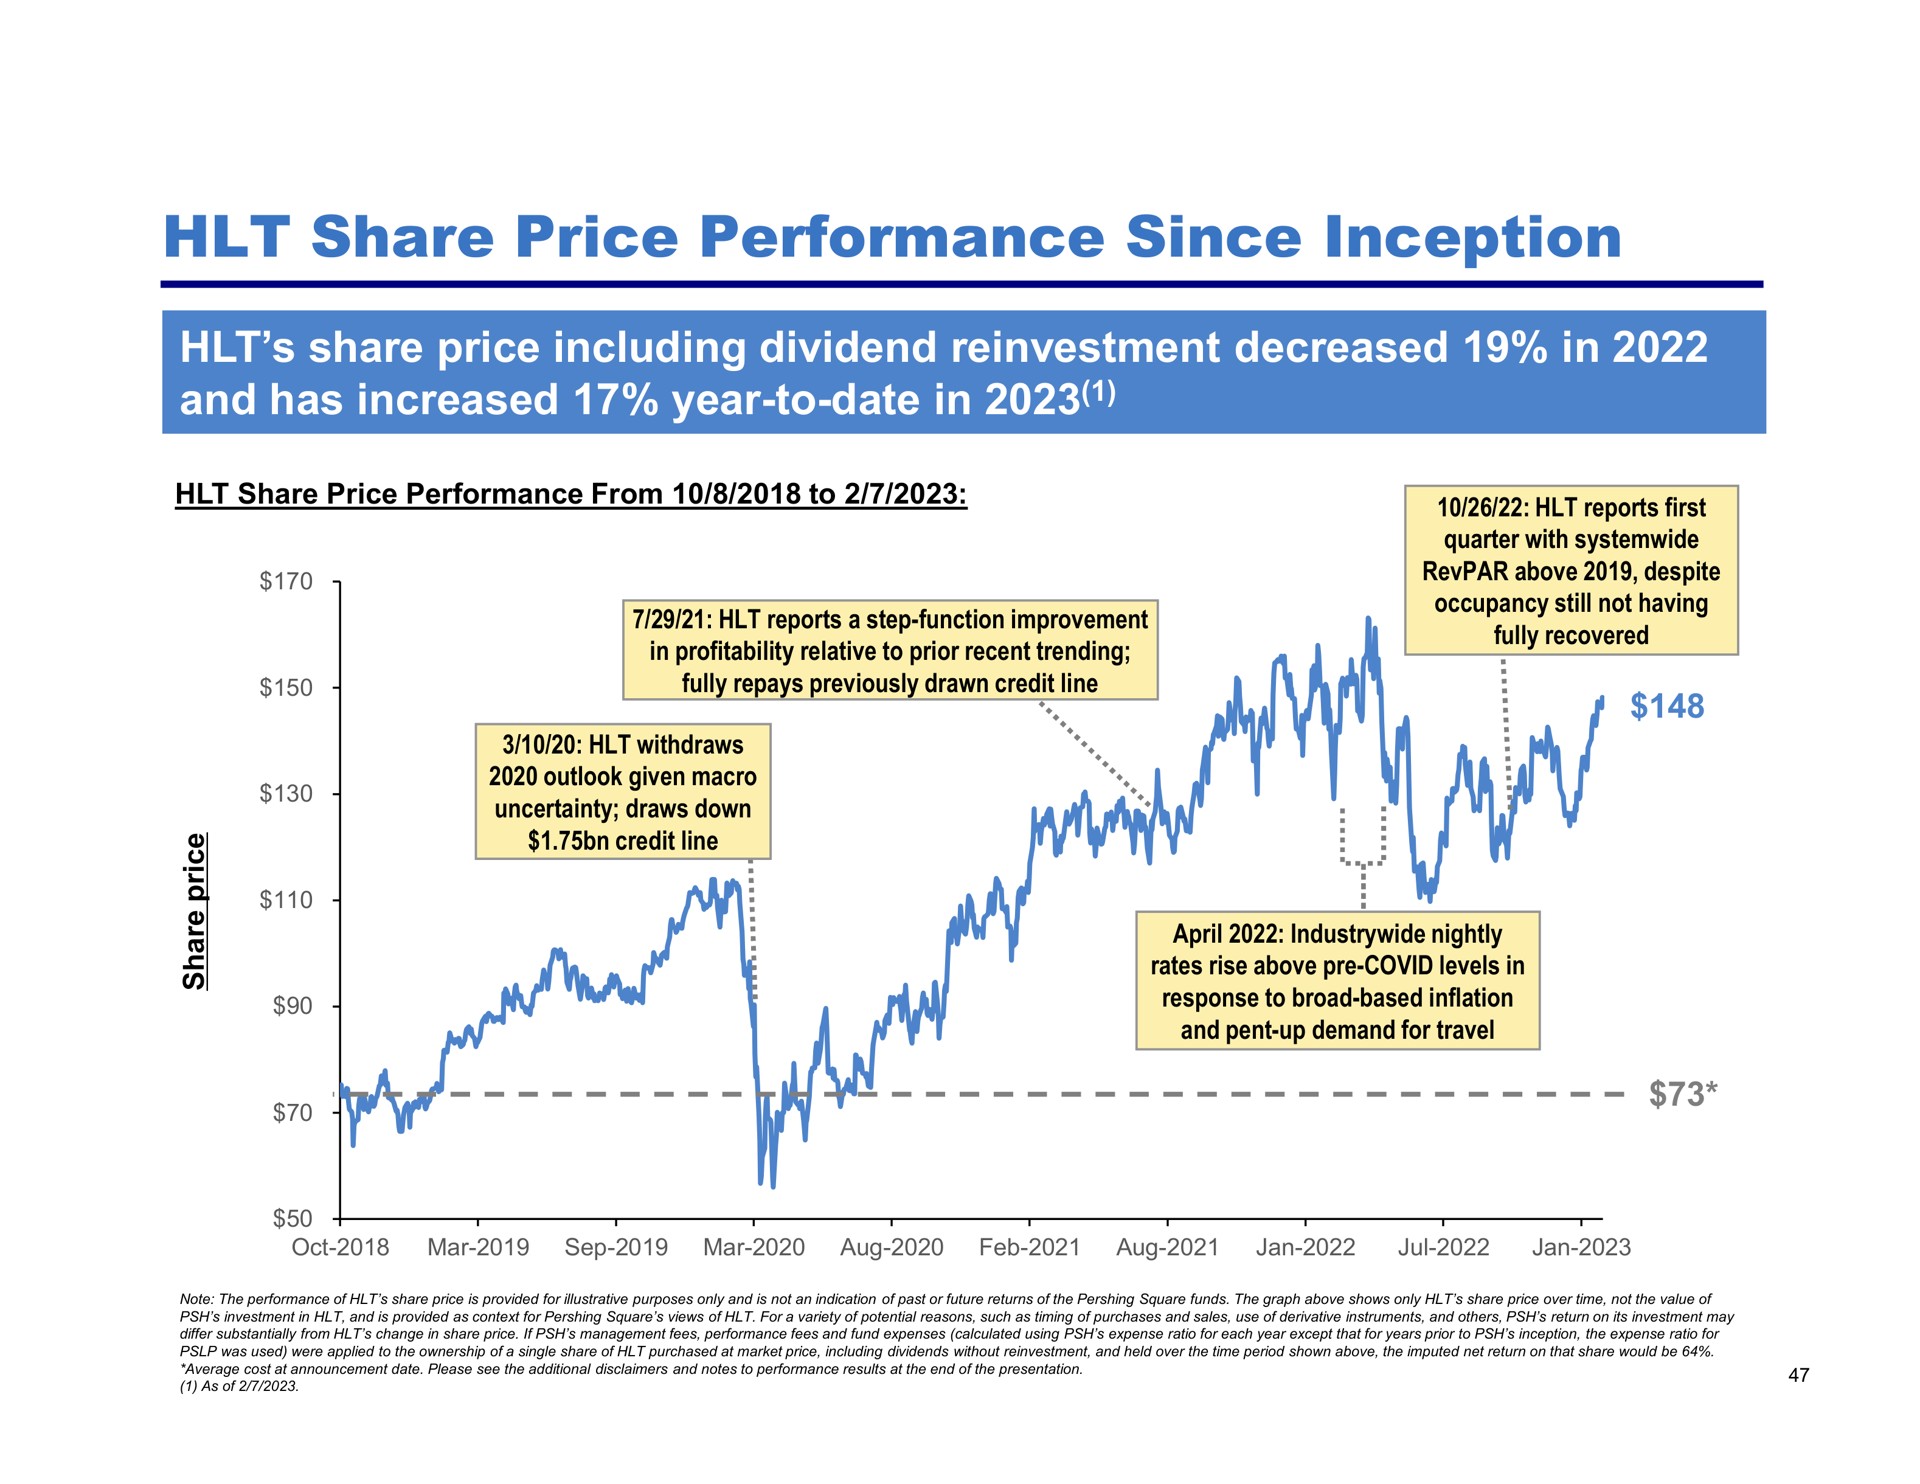 share price performance since inception share price including dividend reinvestment decreased in and has increased year to date in credit line | Pershing Square